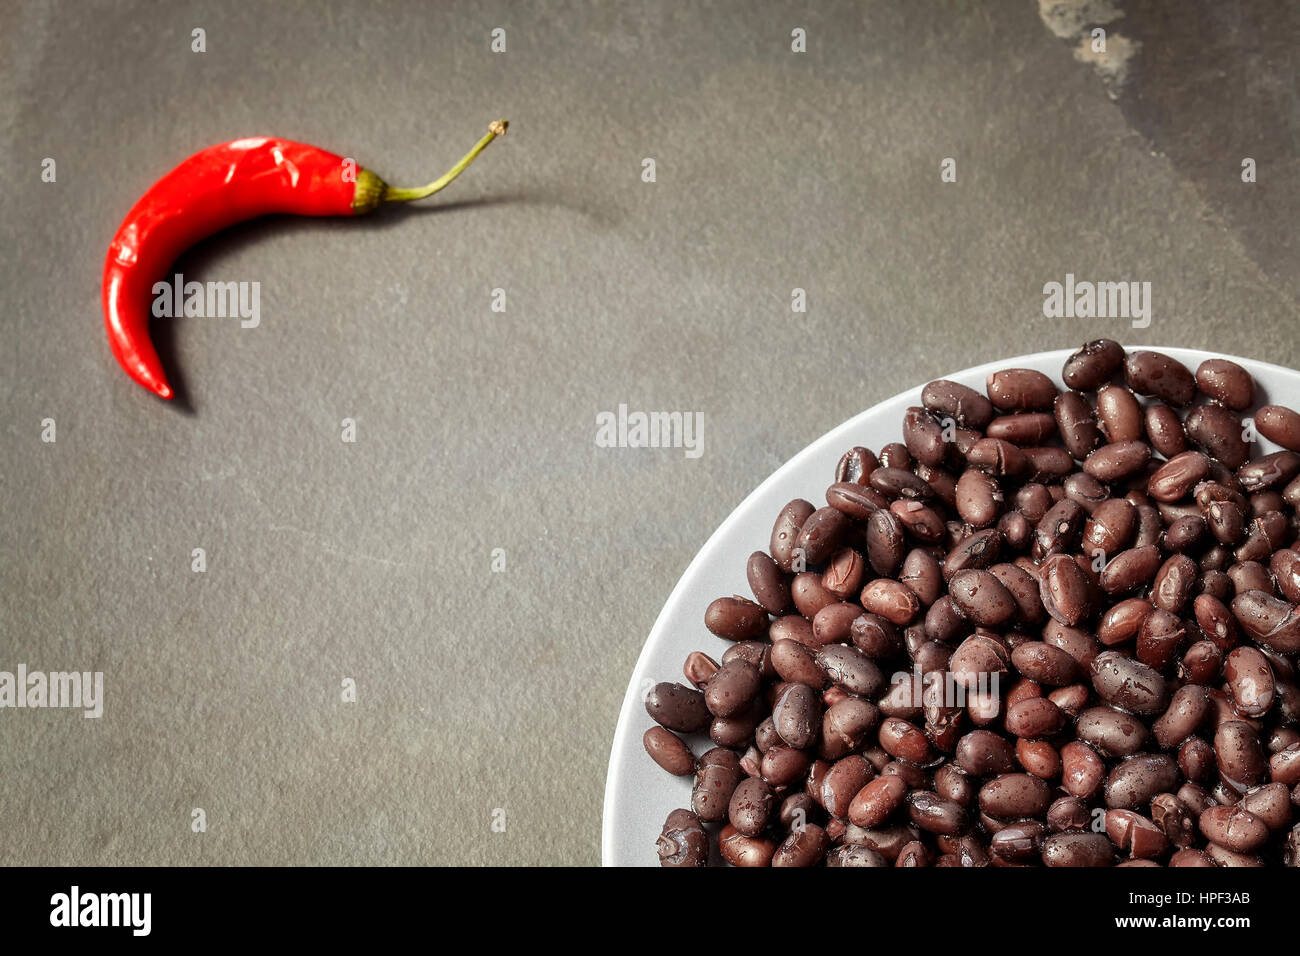 Black bean plate and red chili on slate background, selective focus, copy space. Stock Photo